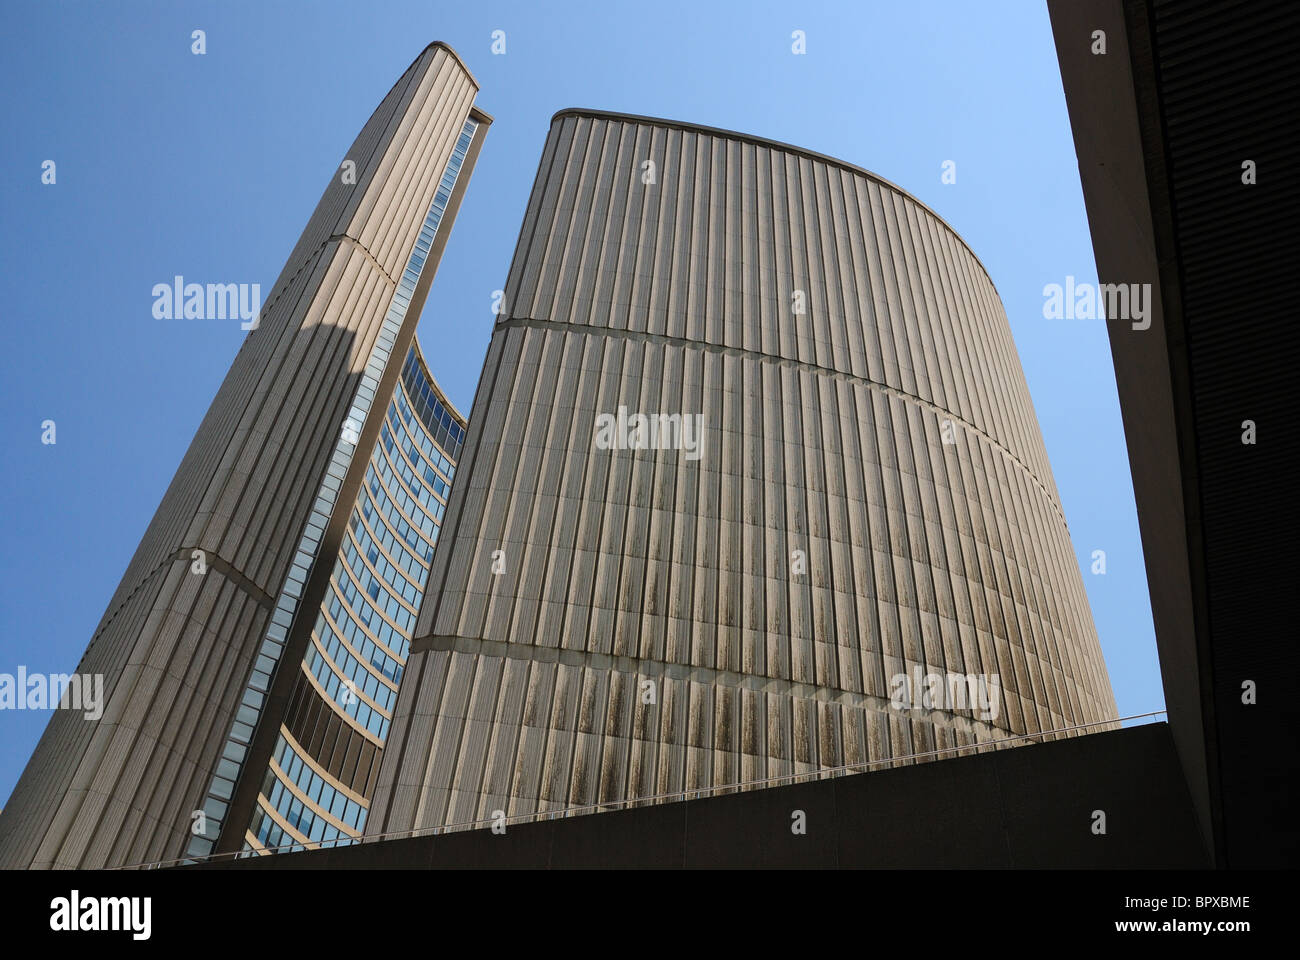 Rear view of the unique curved architectural style of Toronto City hall Stock Photo